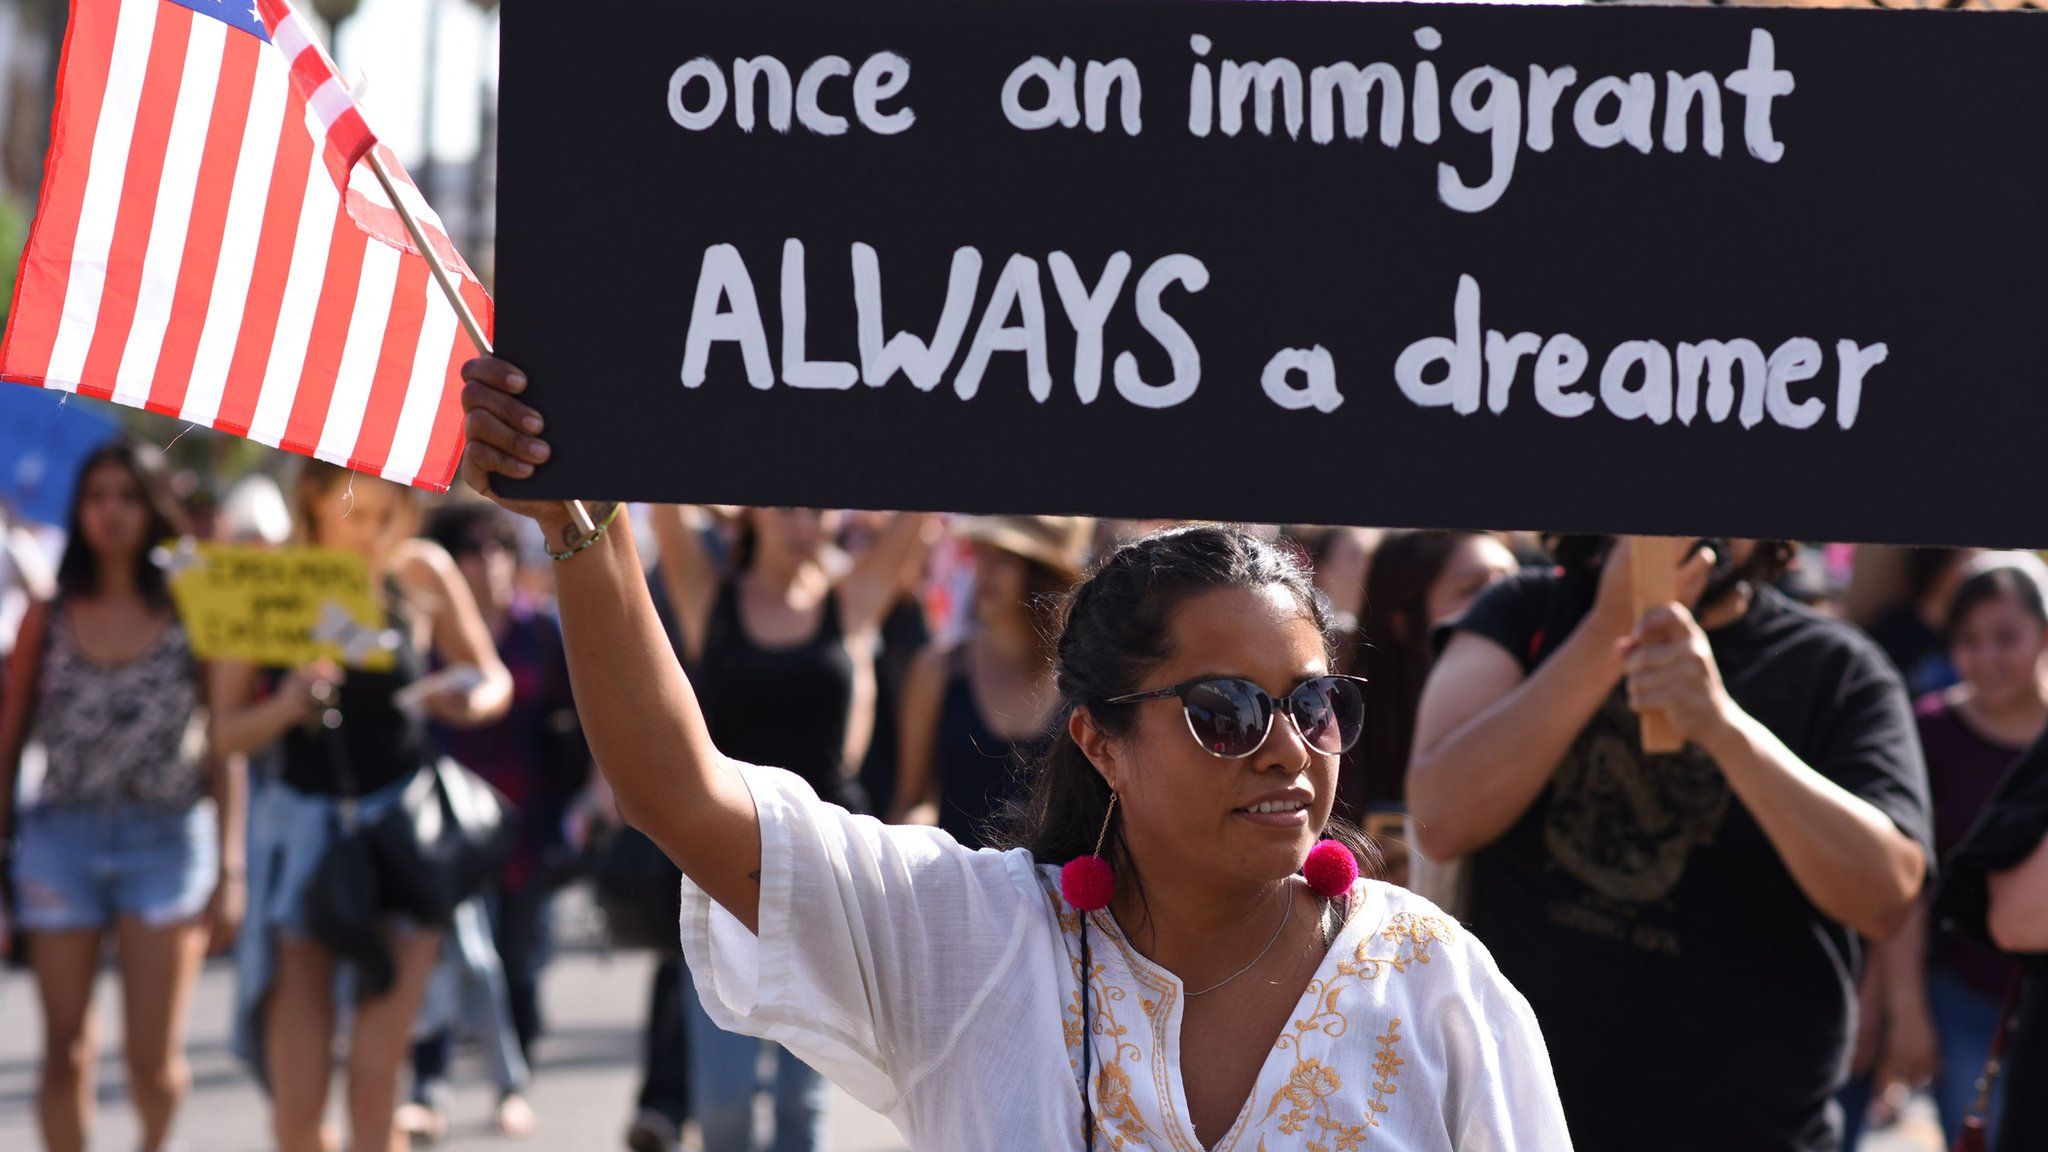 A pro-Dreamer protest in Los Angeles on 10 September 2017